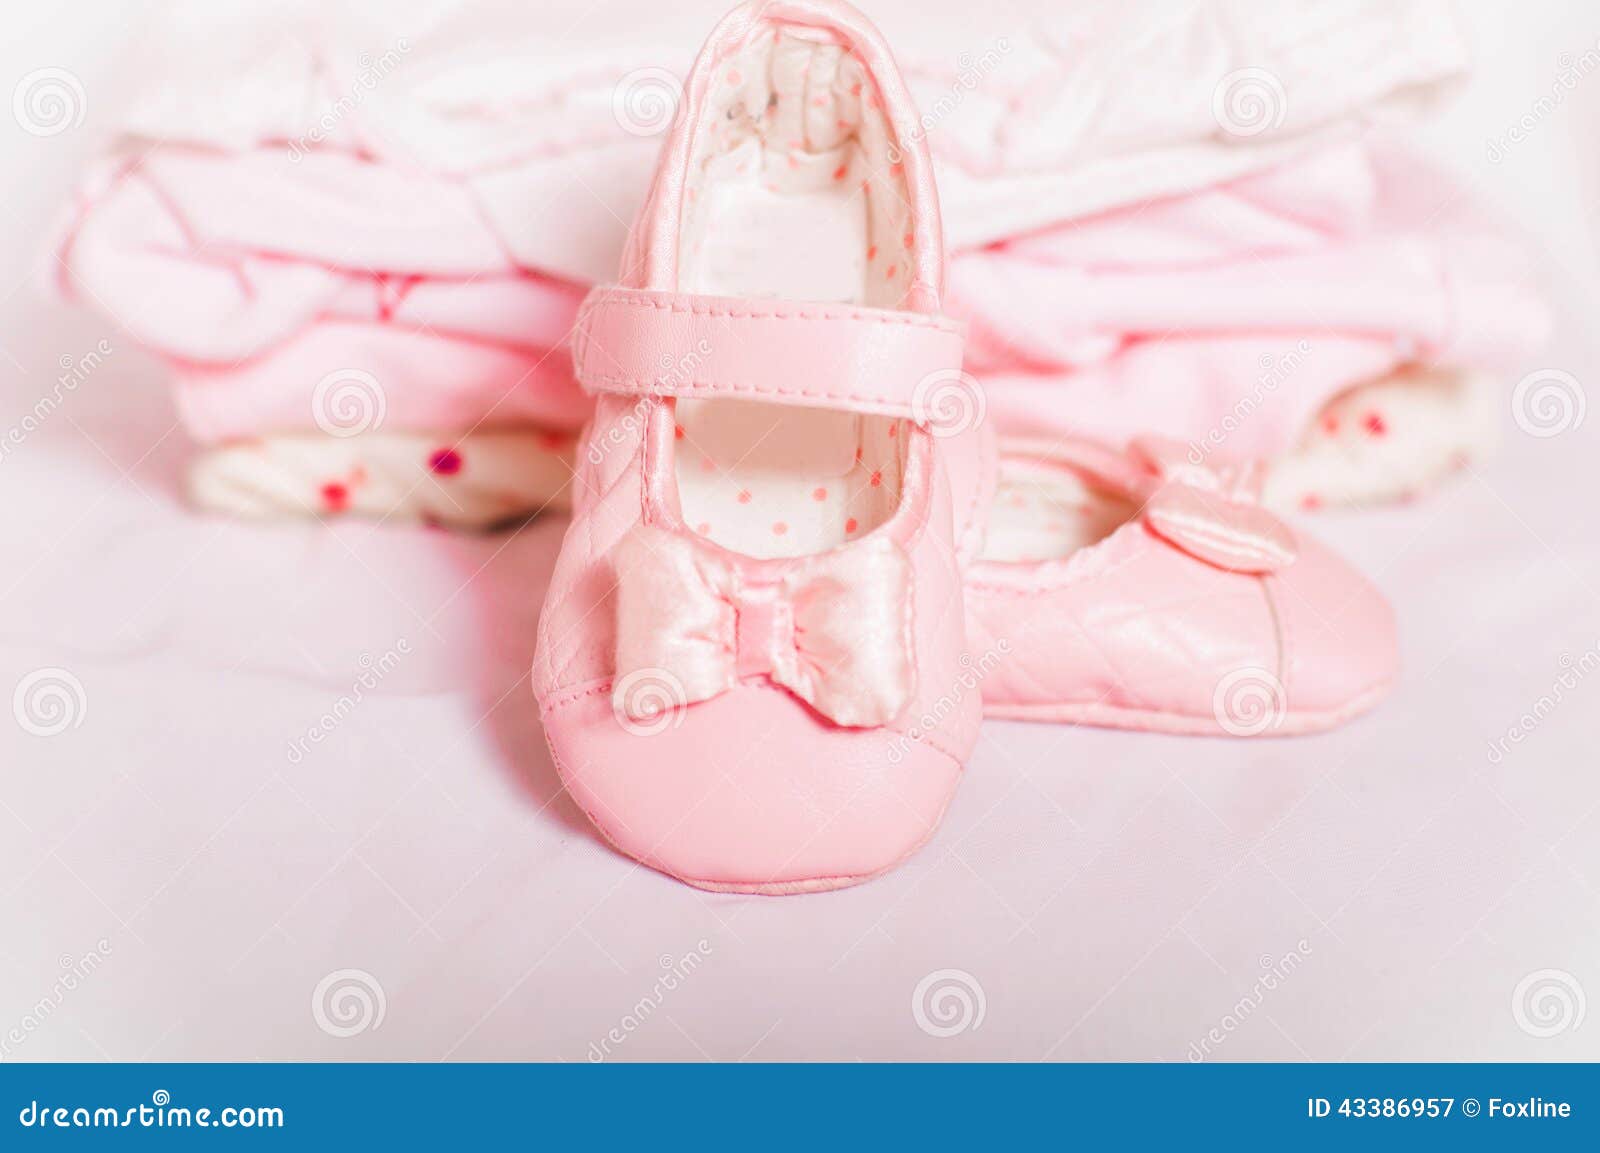 Little Pink Baby Shoes and Baby Clothes Stock Image - Image of ...